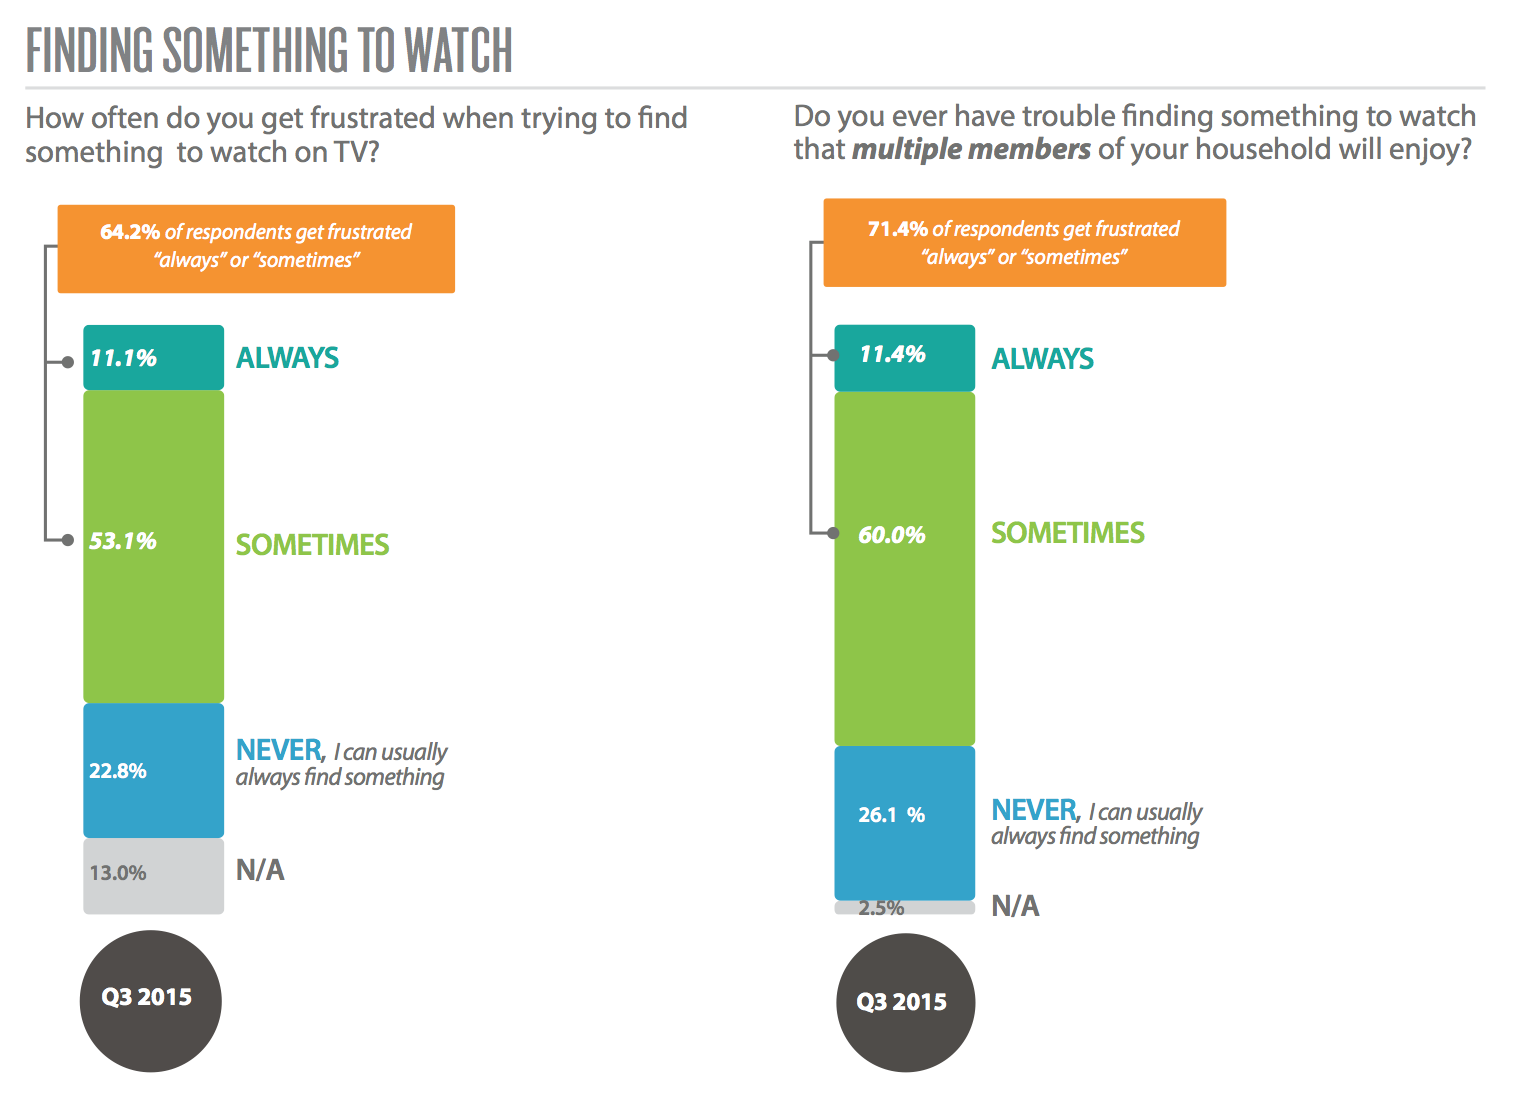 Two-Thirds Of TV Viewers Say They Get Frustrated Trying To Find Something Worth Watching